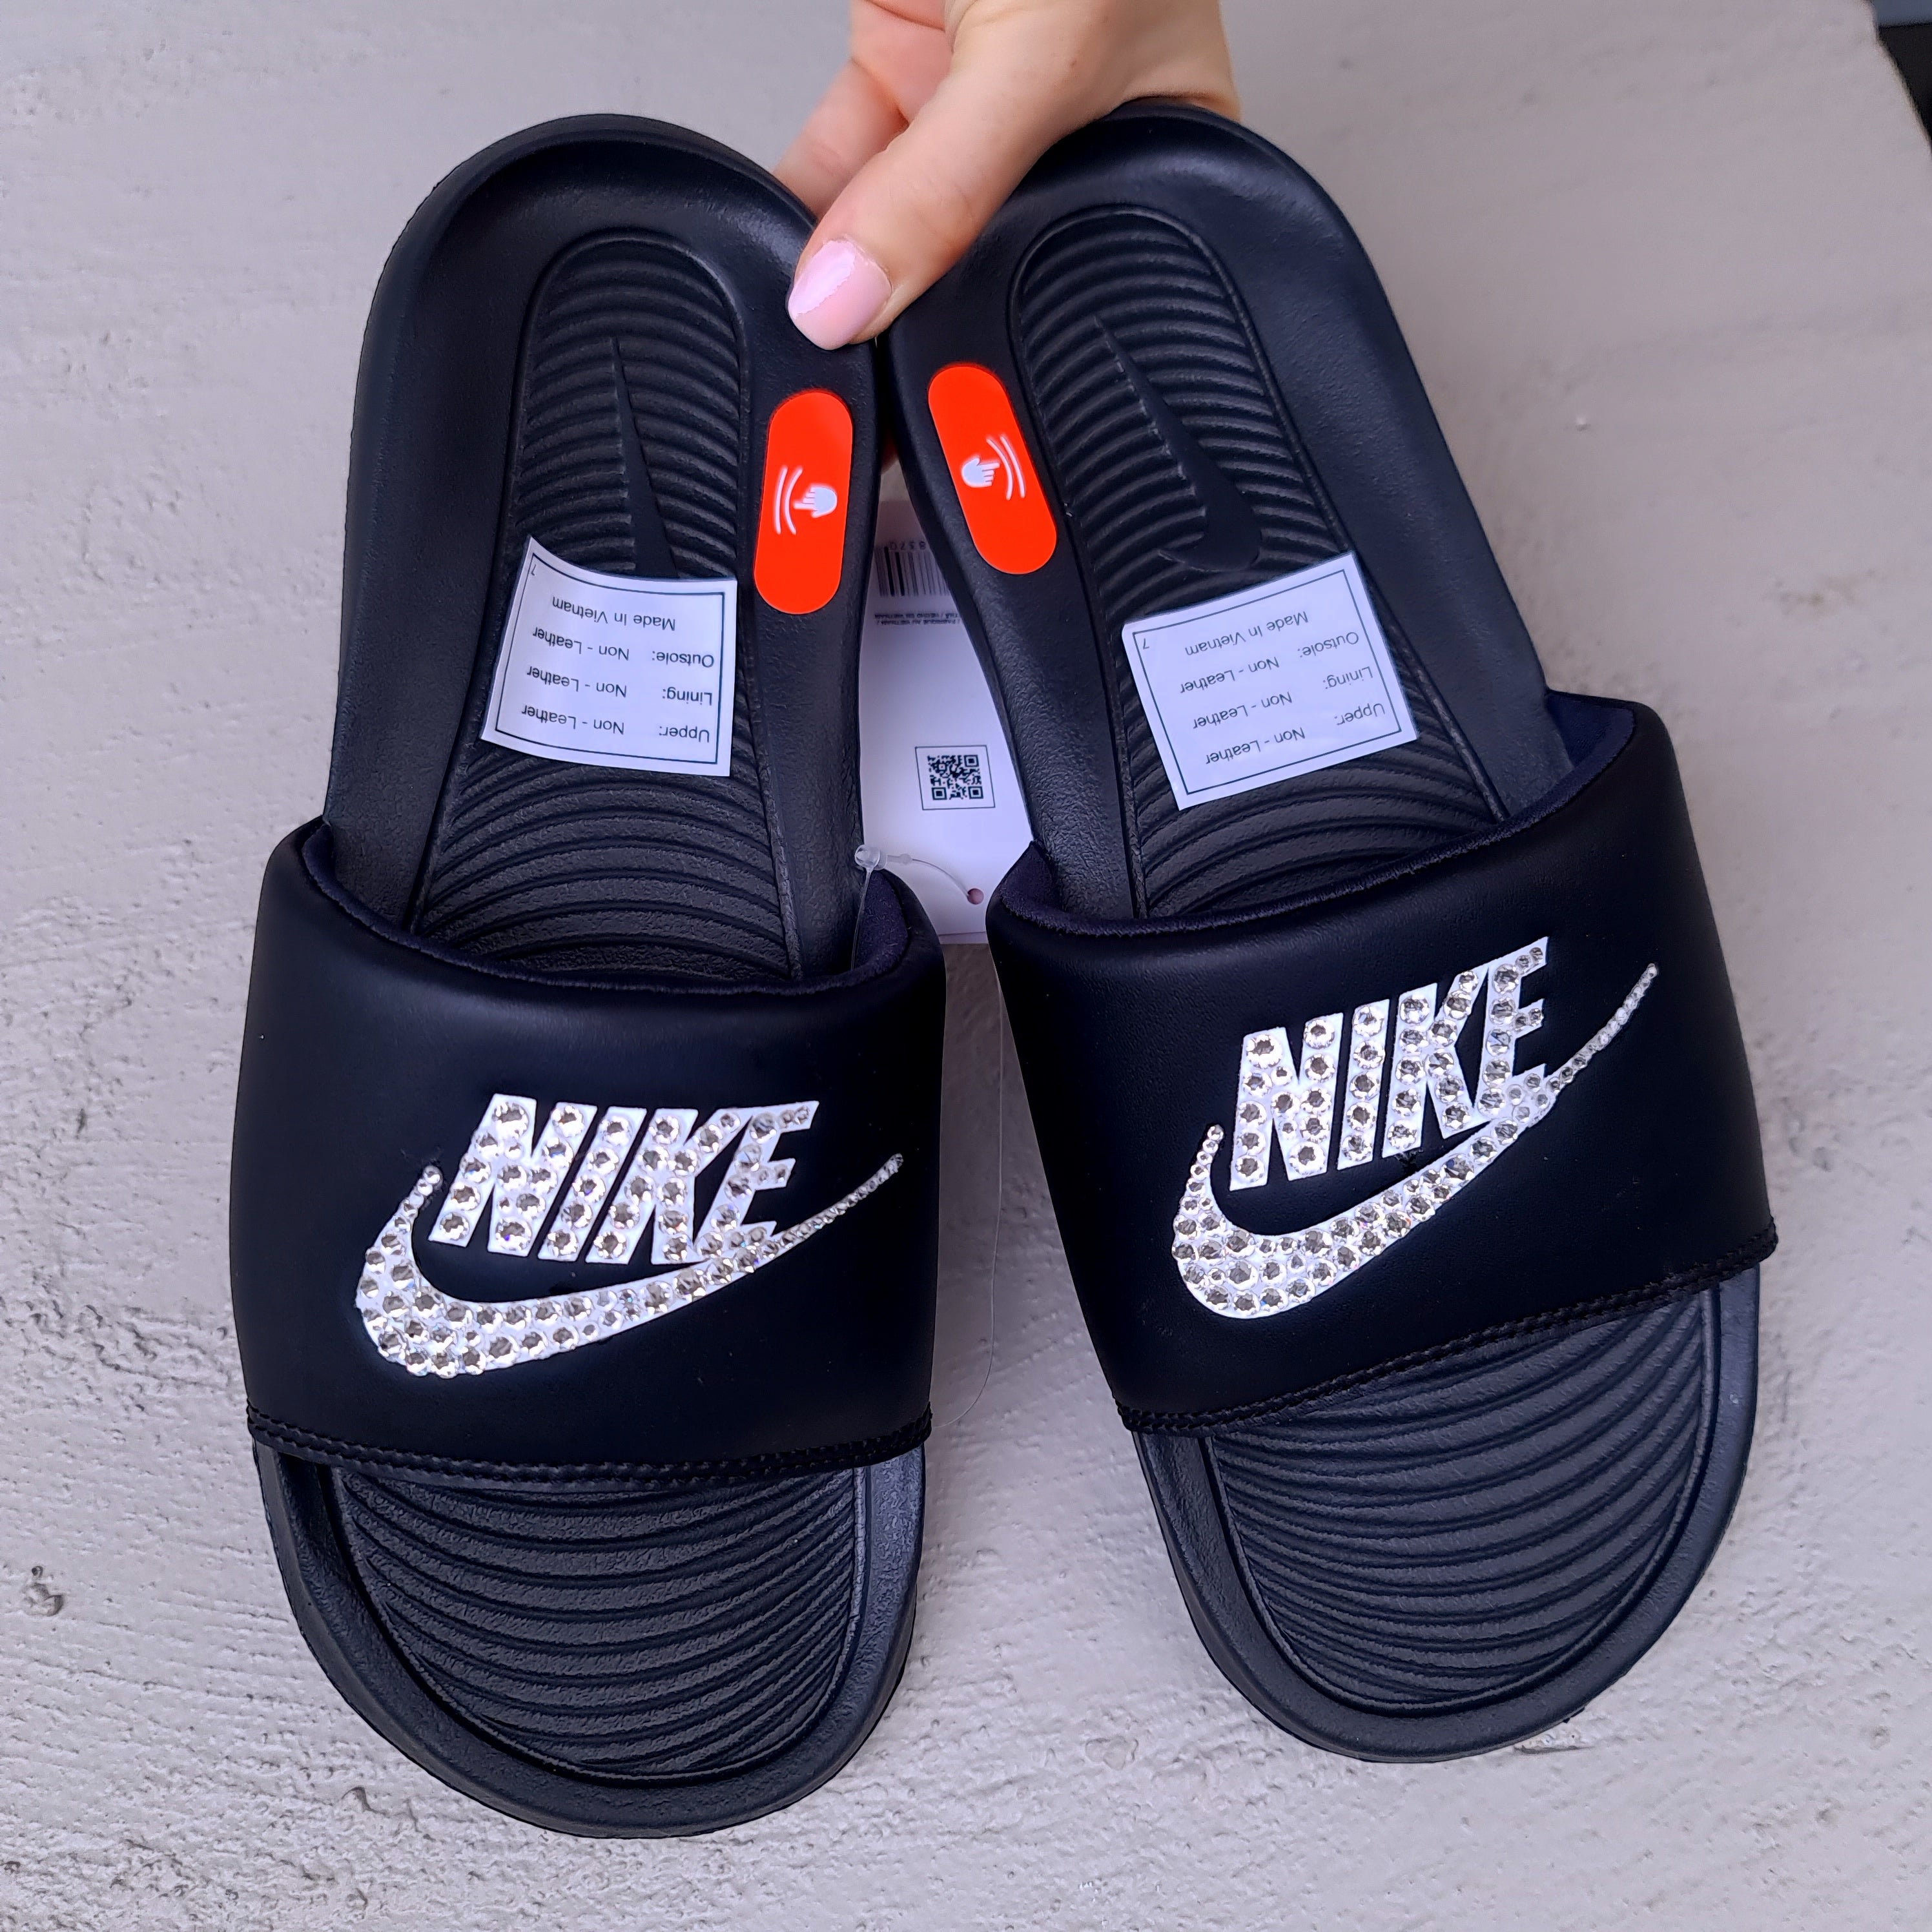 nike sandals with holes